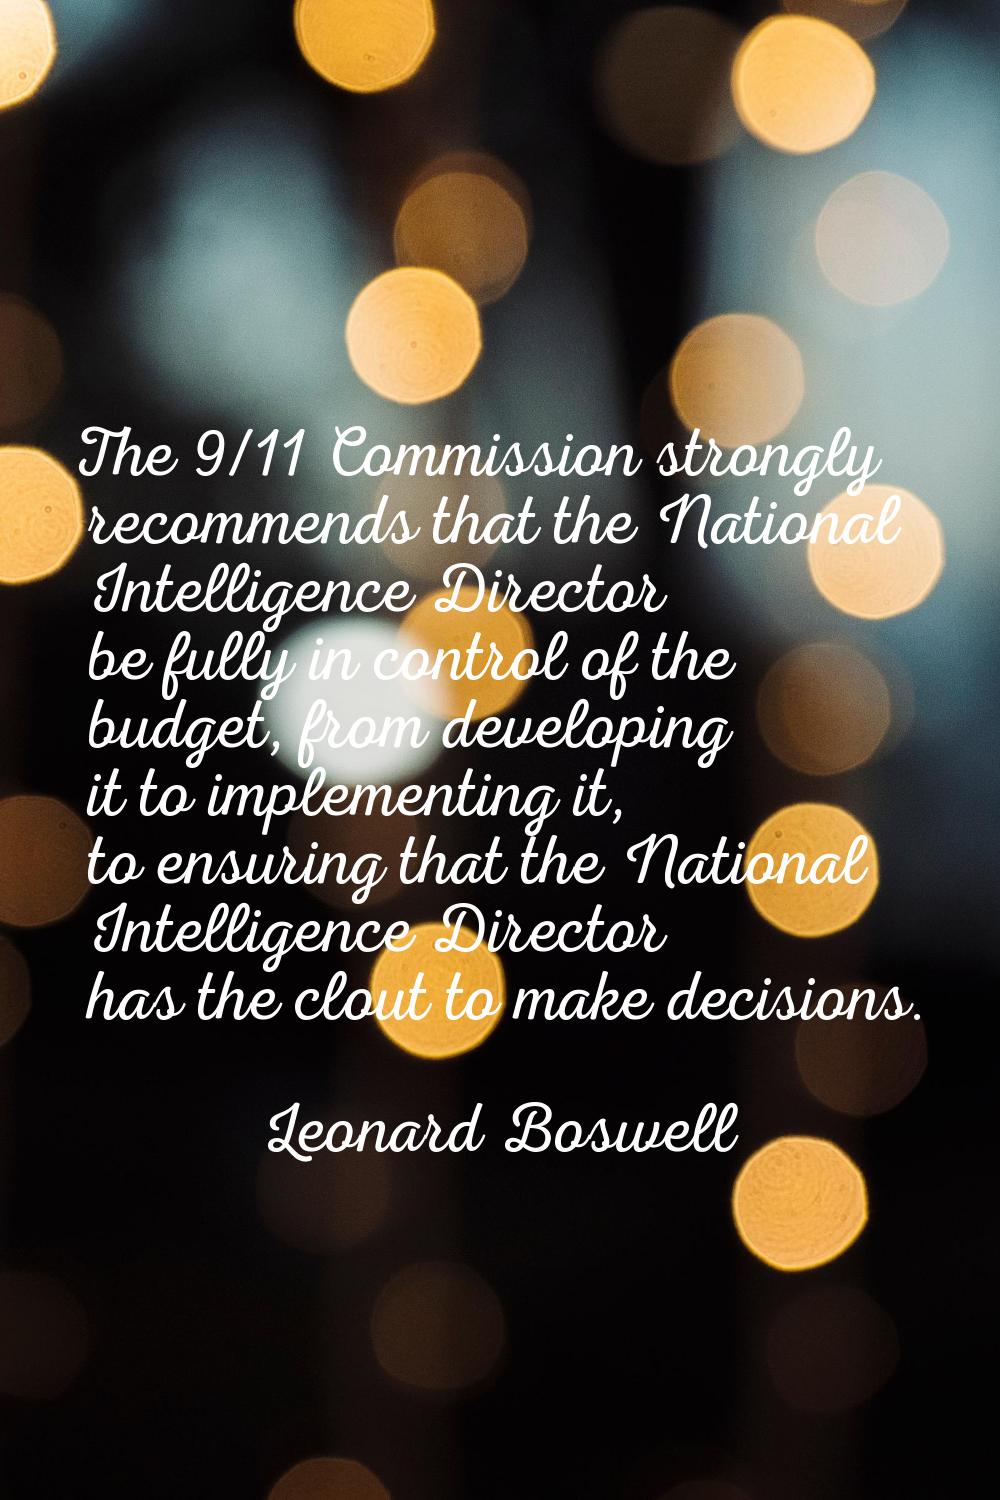 The 9/11 Commission strongly recommends that the National Intelligence Director be fully in control